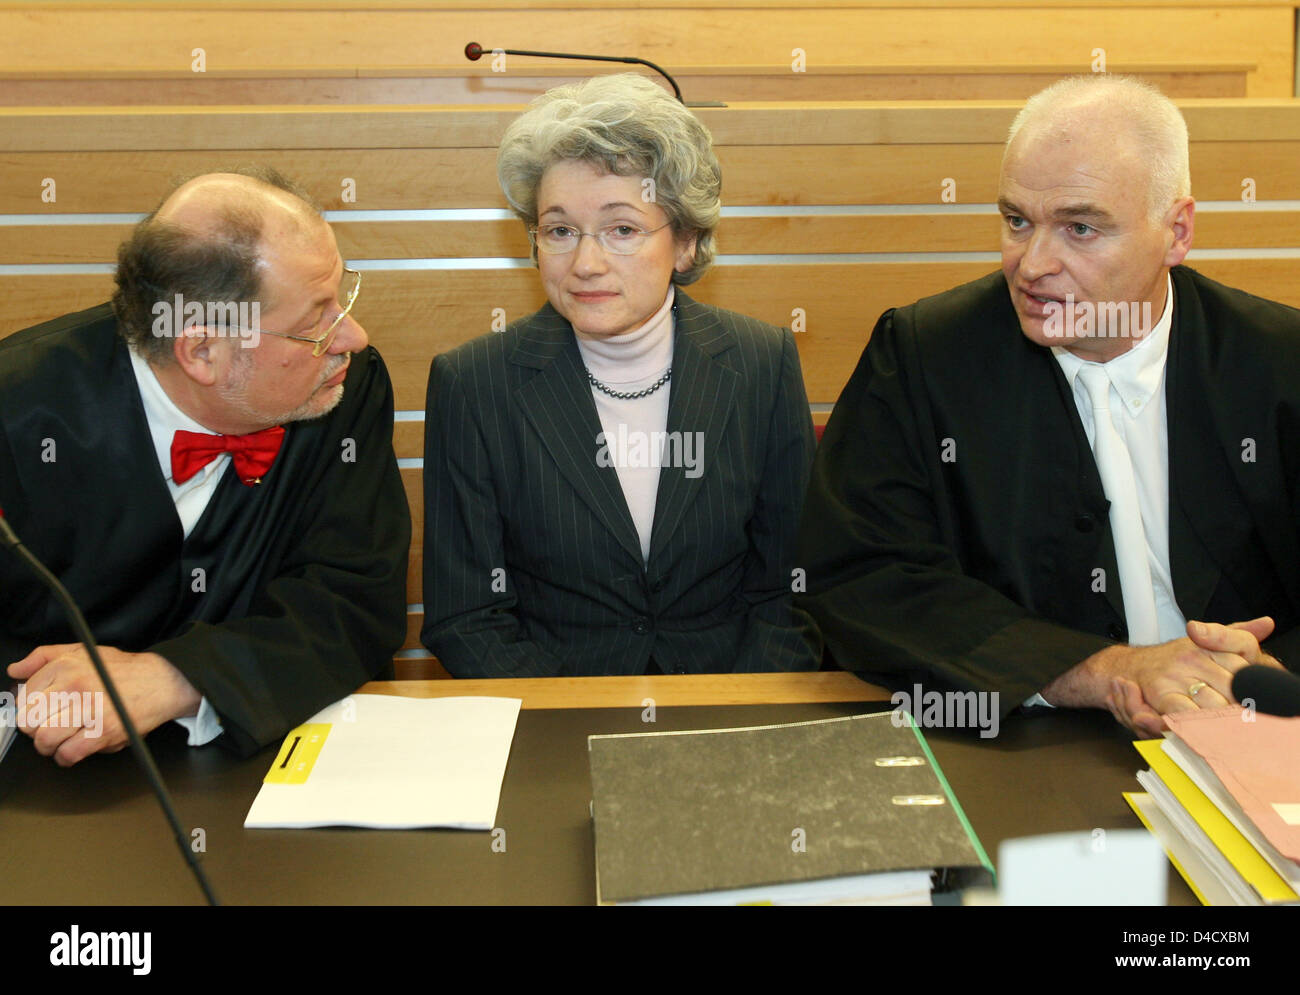 Internist Mechthild Bach (C) is in the dock with her attourneys Matthias Waldraff (R) and Albrecht-Paul Wegener (L) at the start of her trial in Hanover, Germany, 28 February 2008. The physician is accused of eightfold homicide killing patients with overdosed morphine. Photo: HOLGER HOLLEMANN Stock Photo